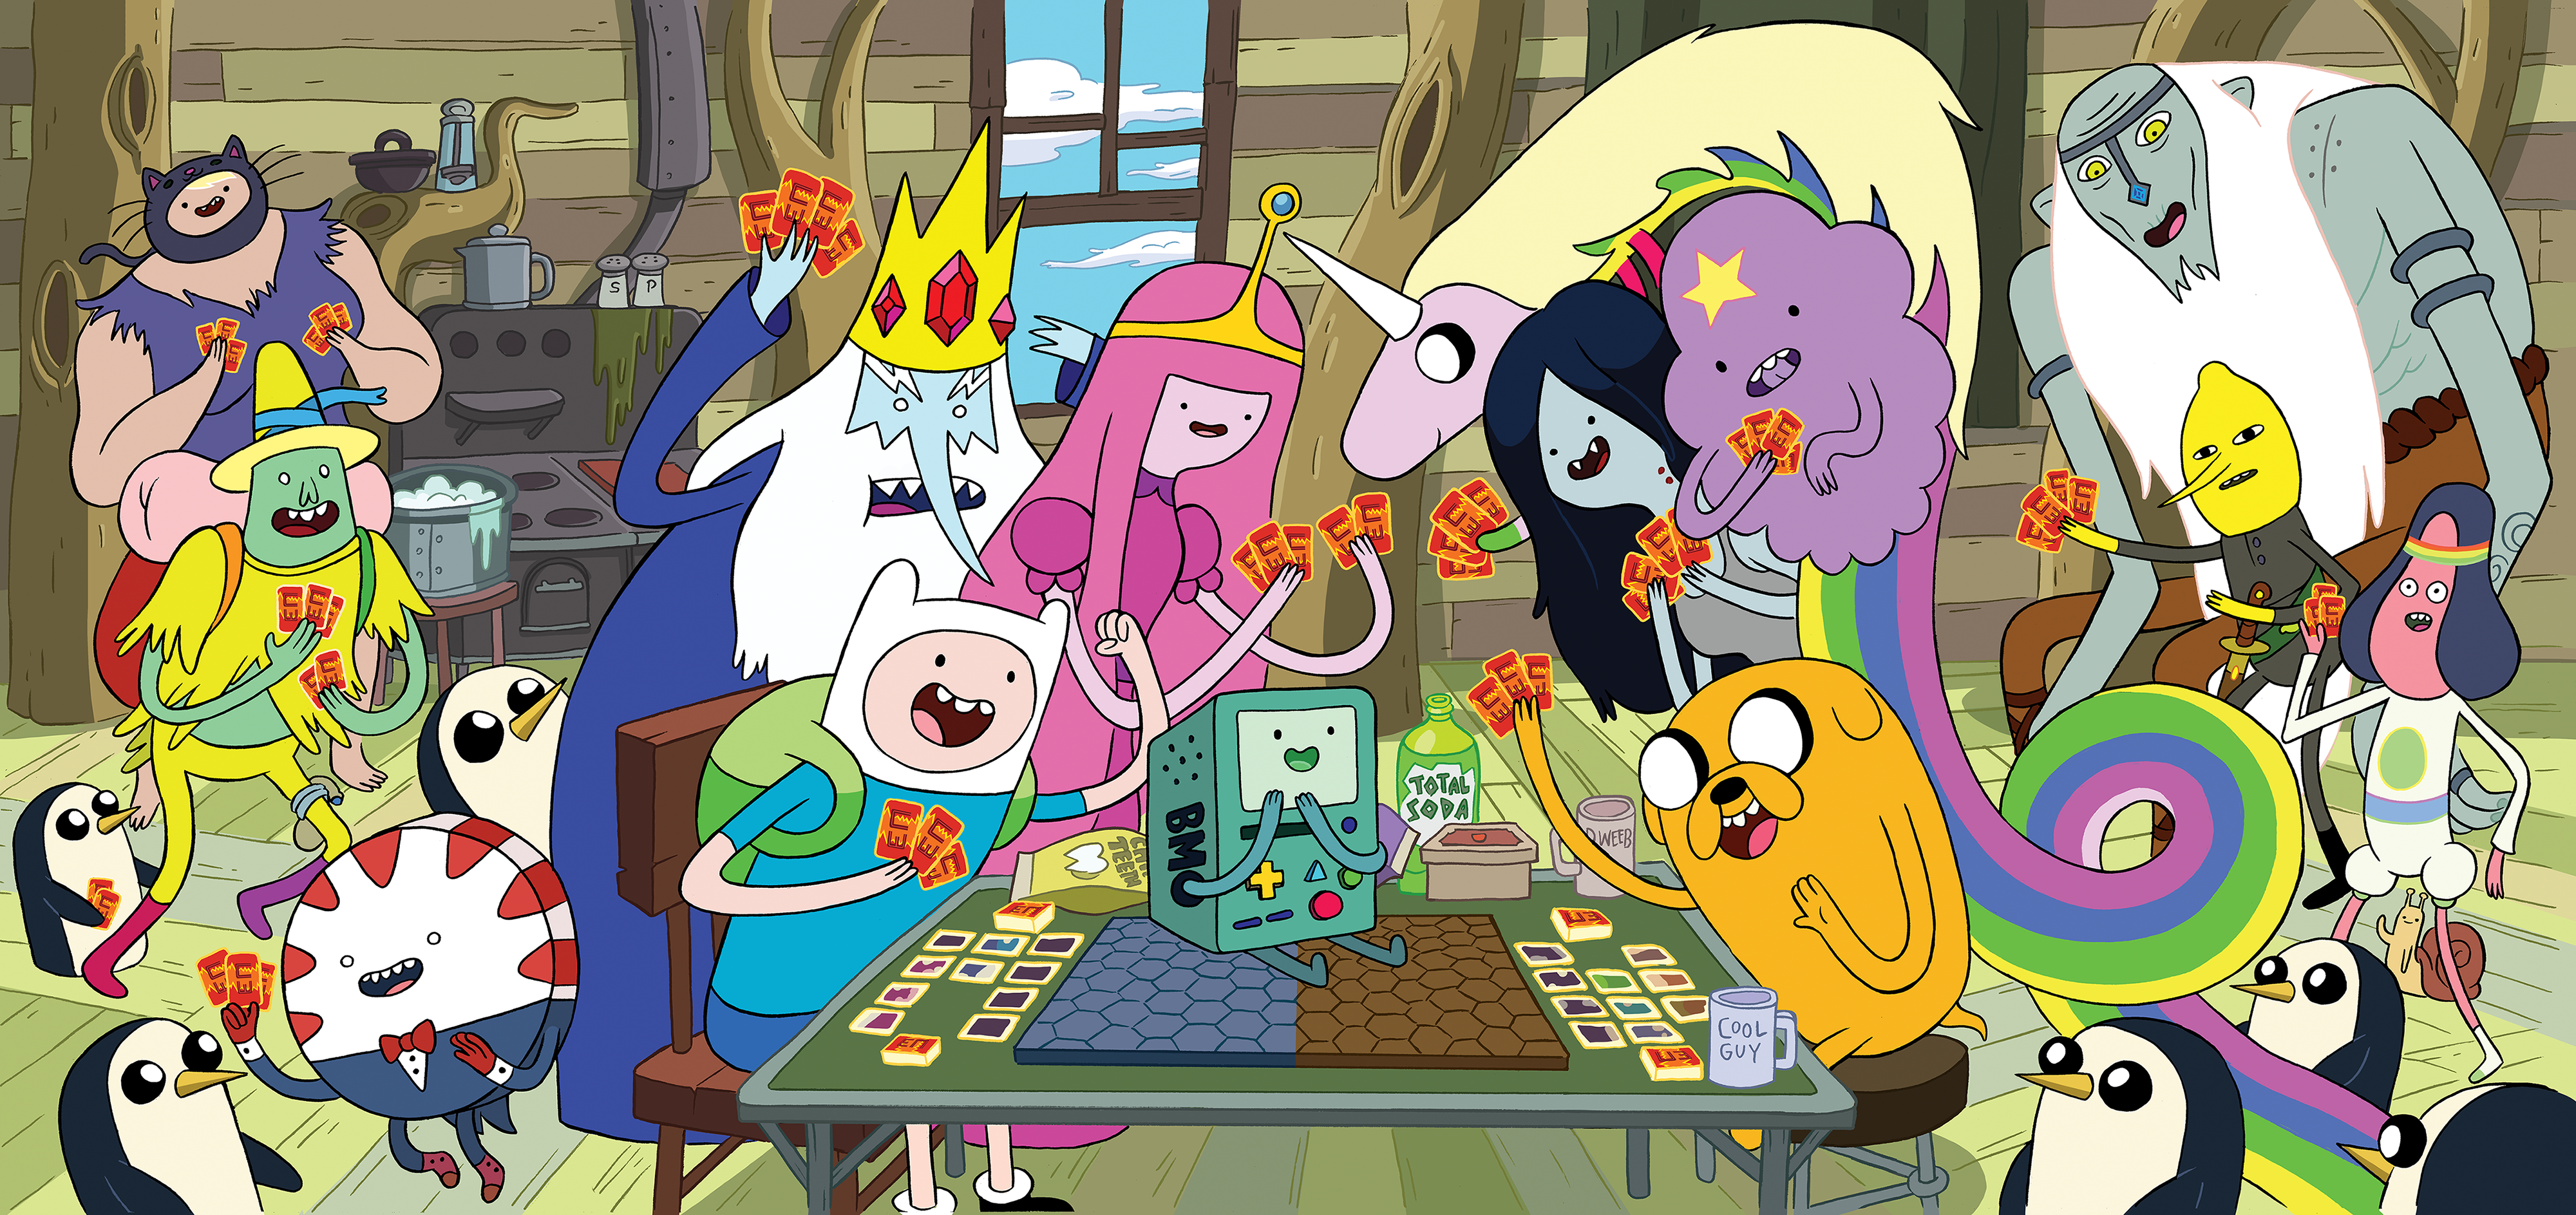 Adventure Time Card Wars 10th Anniversary by Cryptozoic